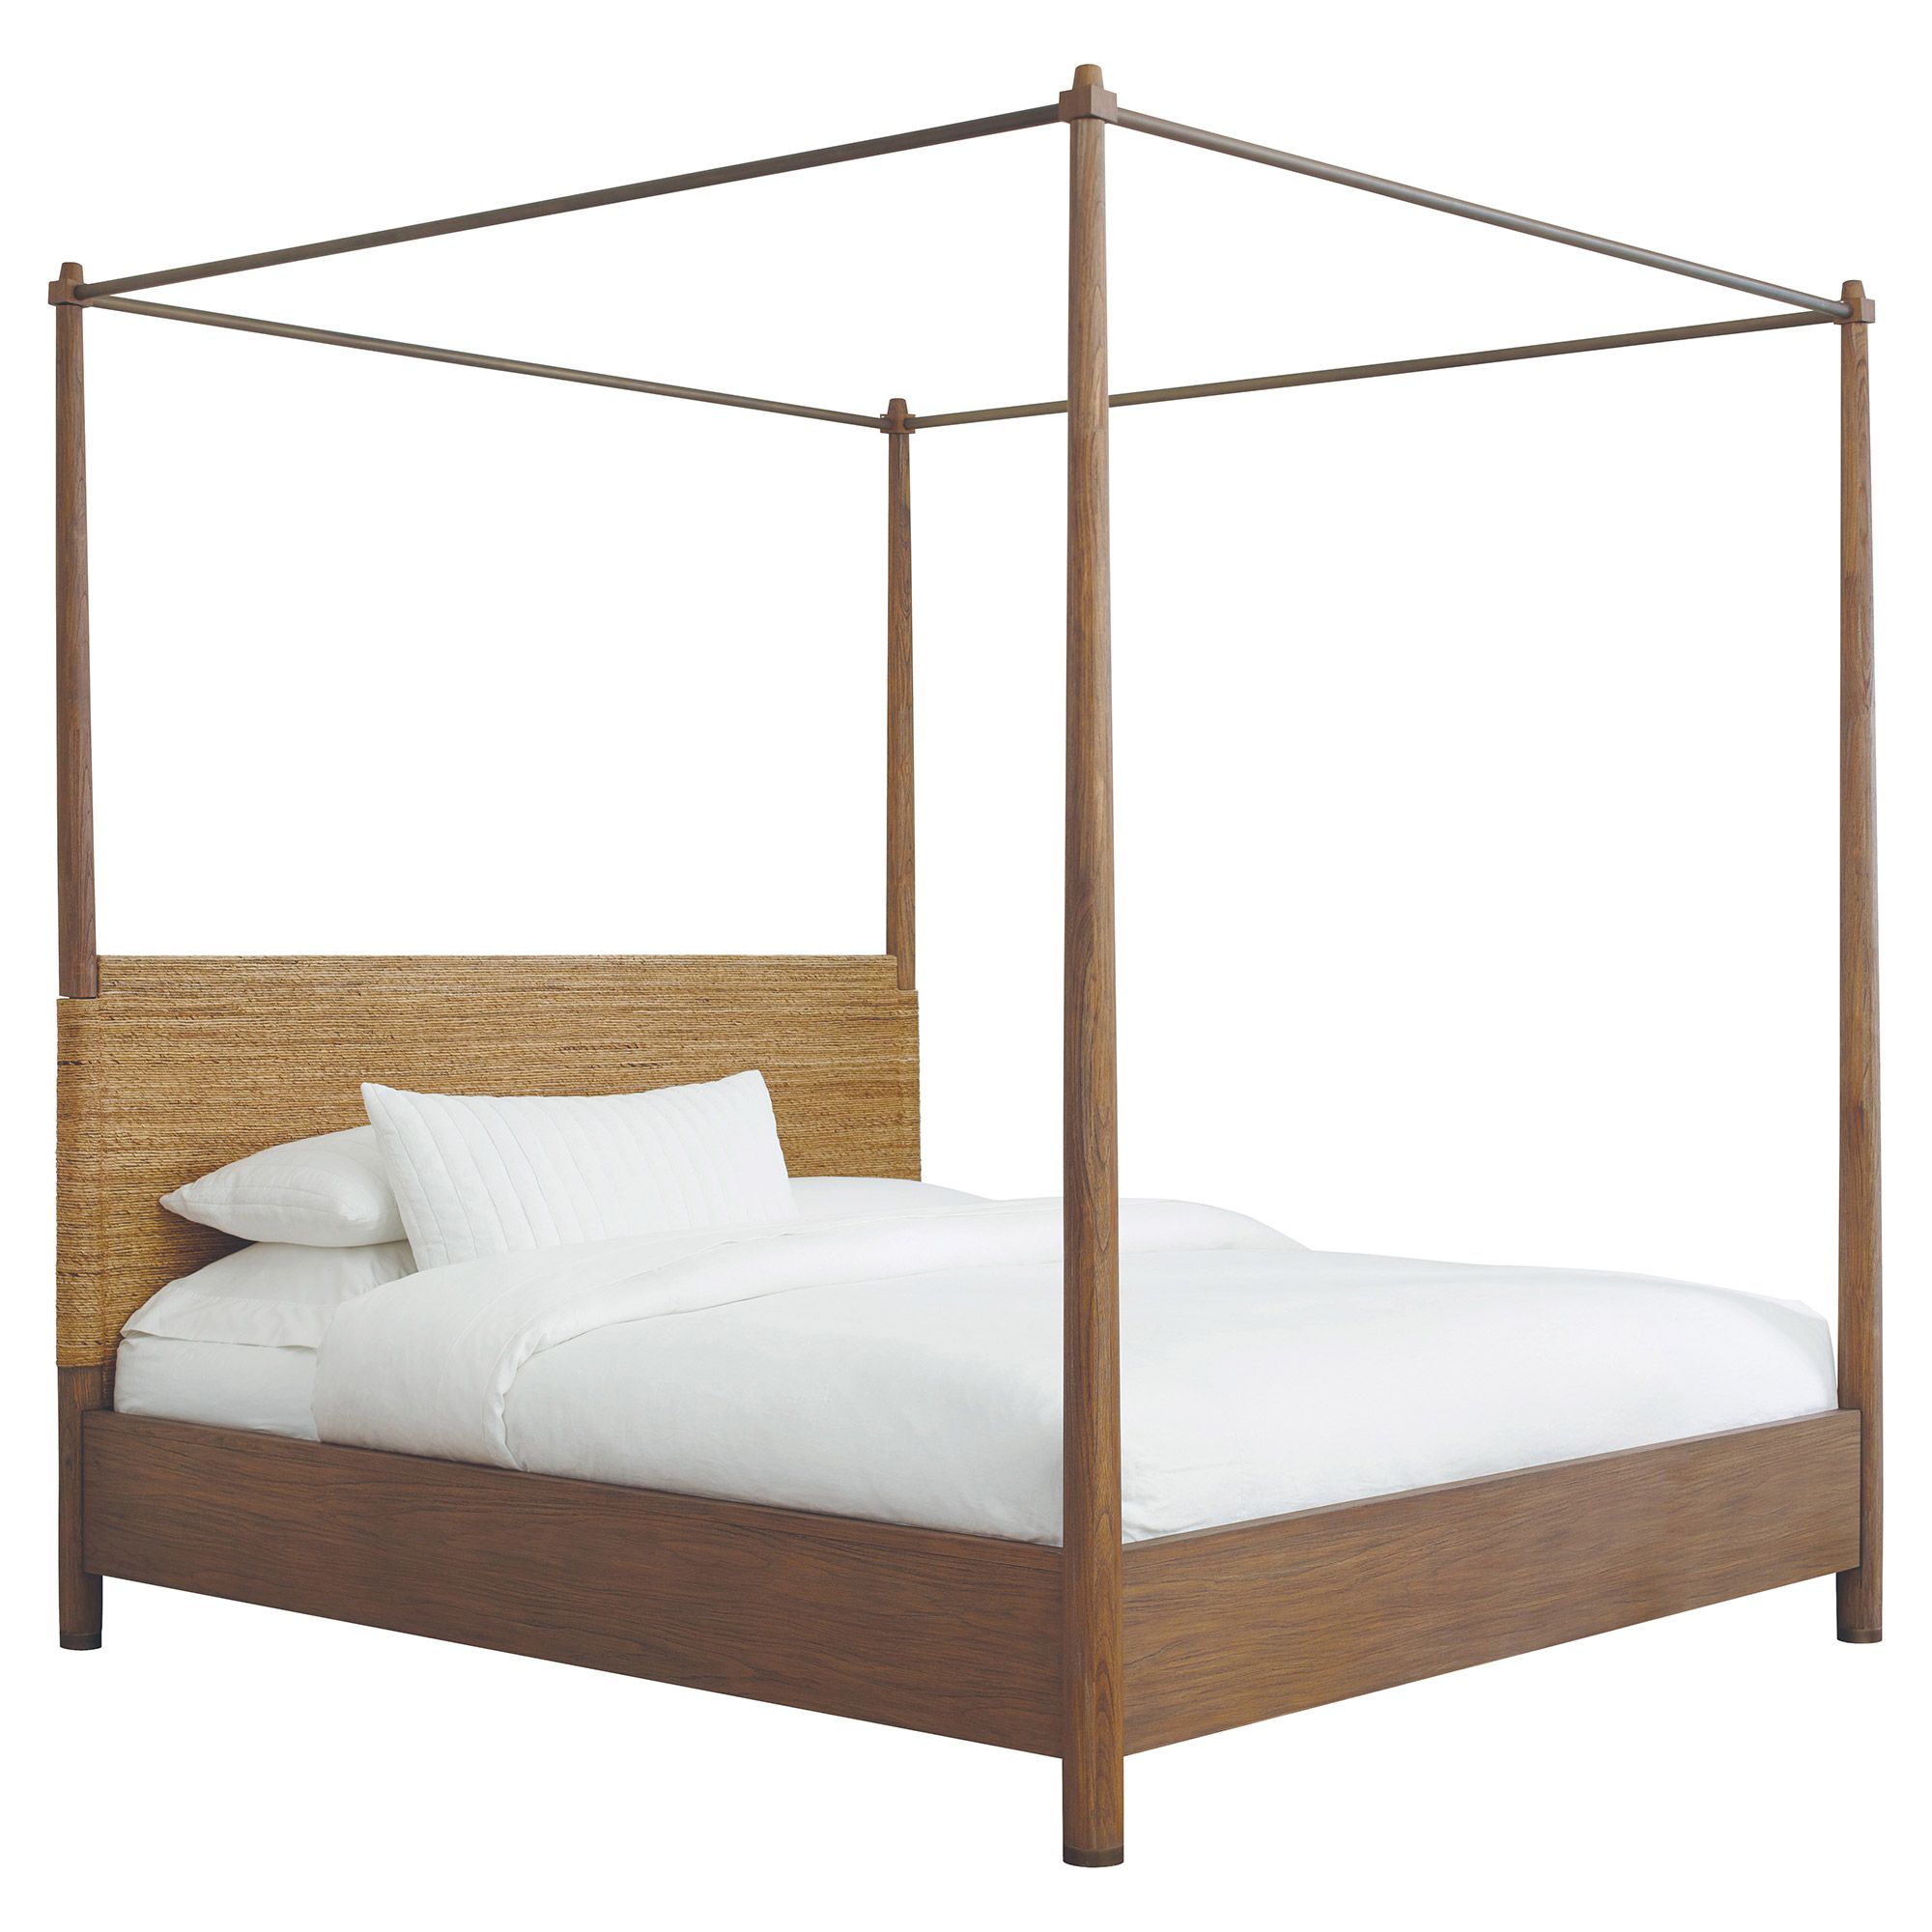 Germaine Coastal Beach Woven Abaca Teak Wooden Canopy Bed - Queen | Kathy Kuo Home